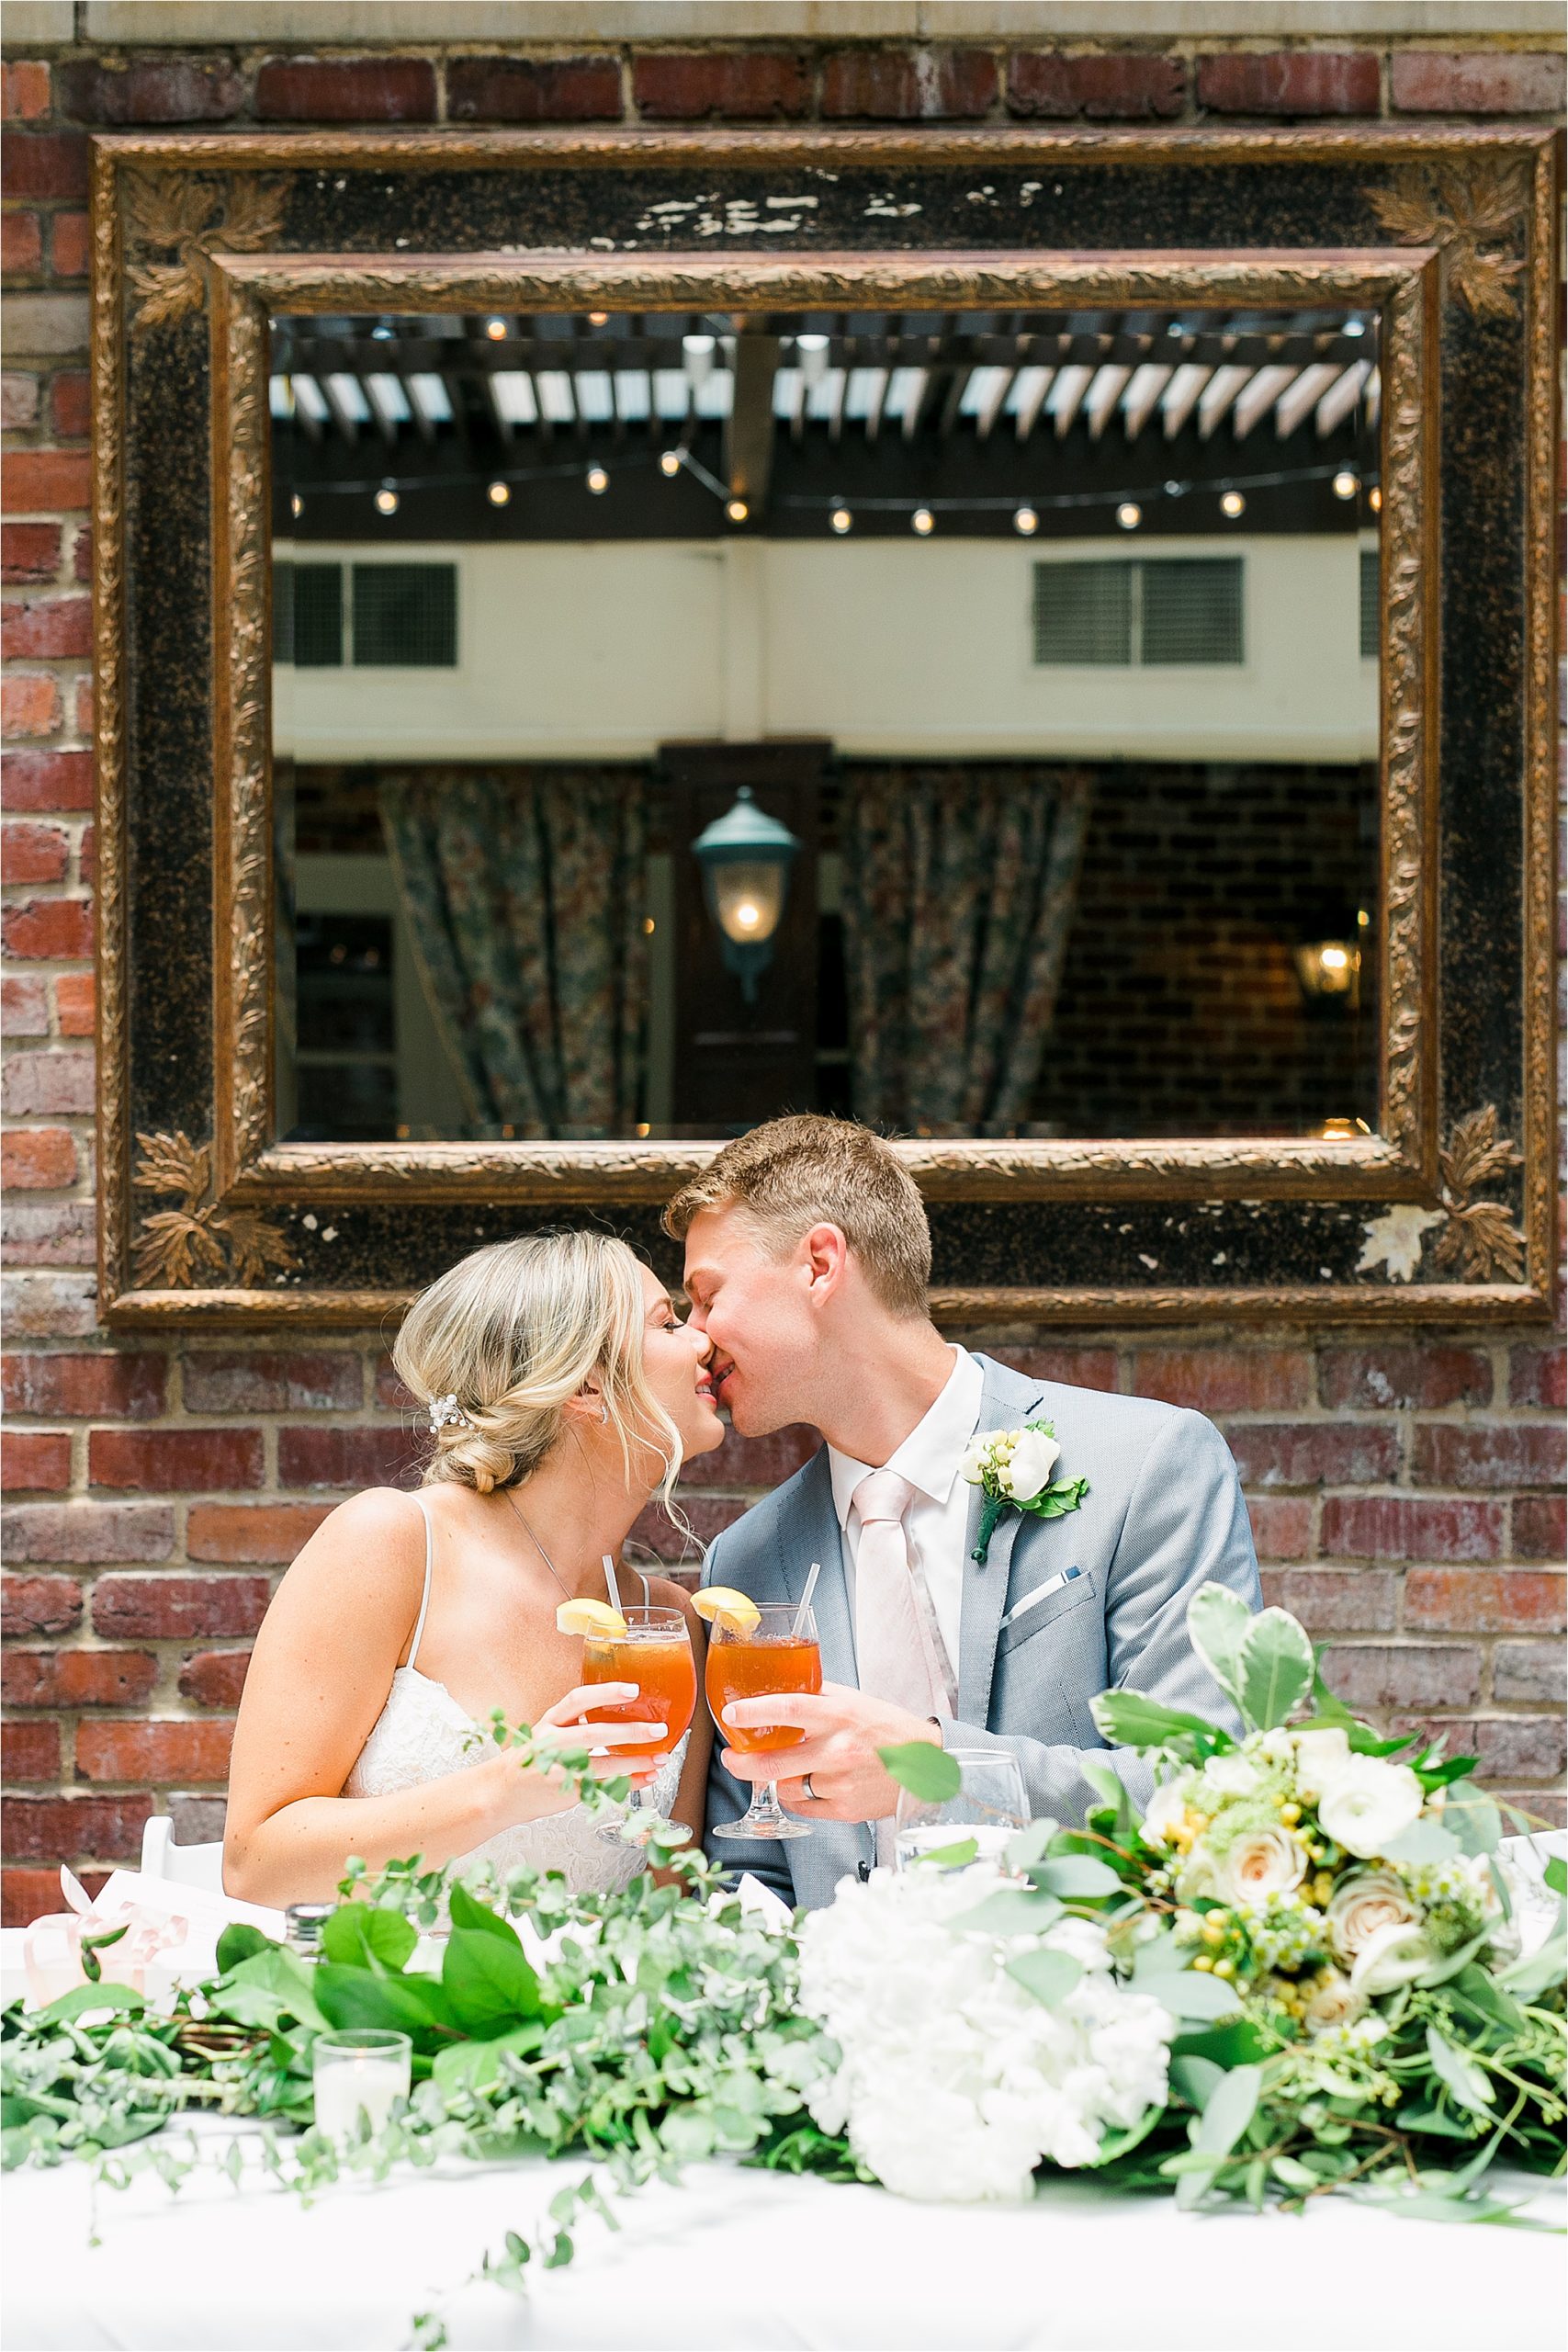 A bride and groom share a kiss at their head table during their garden reception at III Forks in Dallas, Texas 